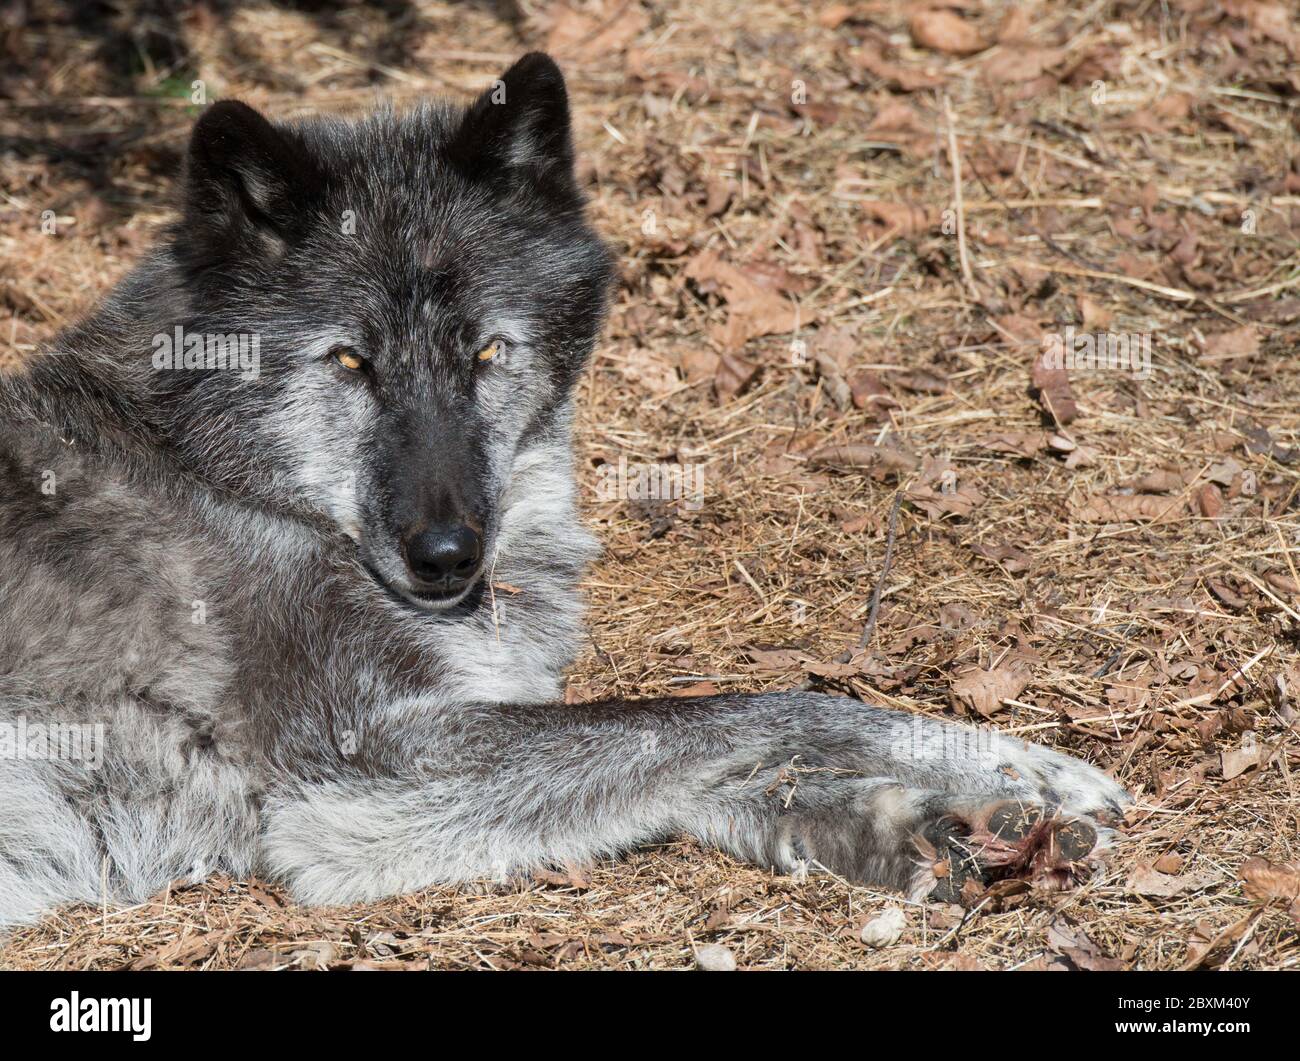 Black Timber Wolf (also known as a Gray or Grey Wolf) waking up from a nap Stock Photo